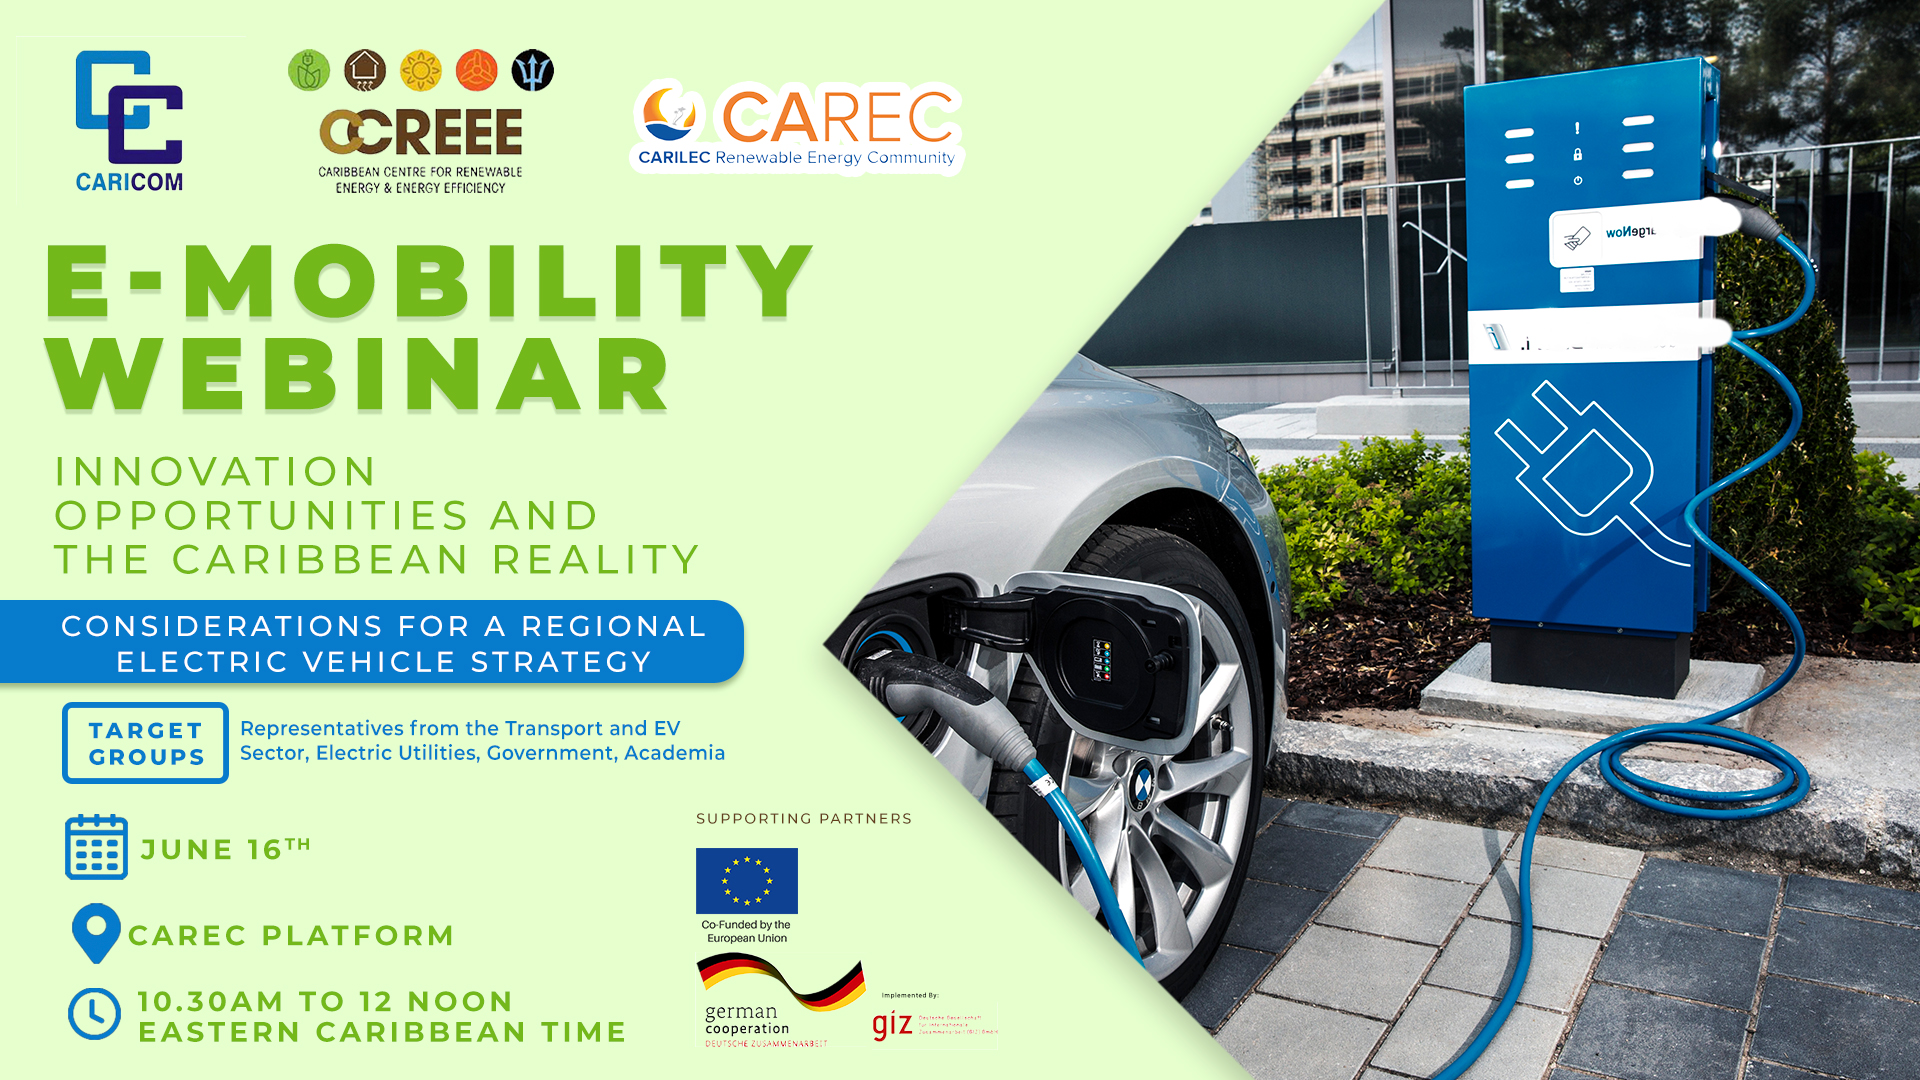 Innovation, Opportunities and the Caribbean Reality – Considerations for a Regional Electric Vehicle Strategy